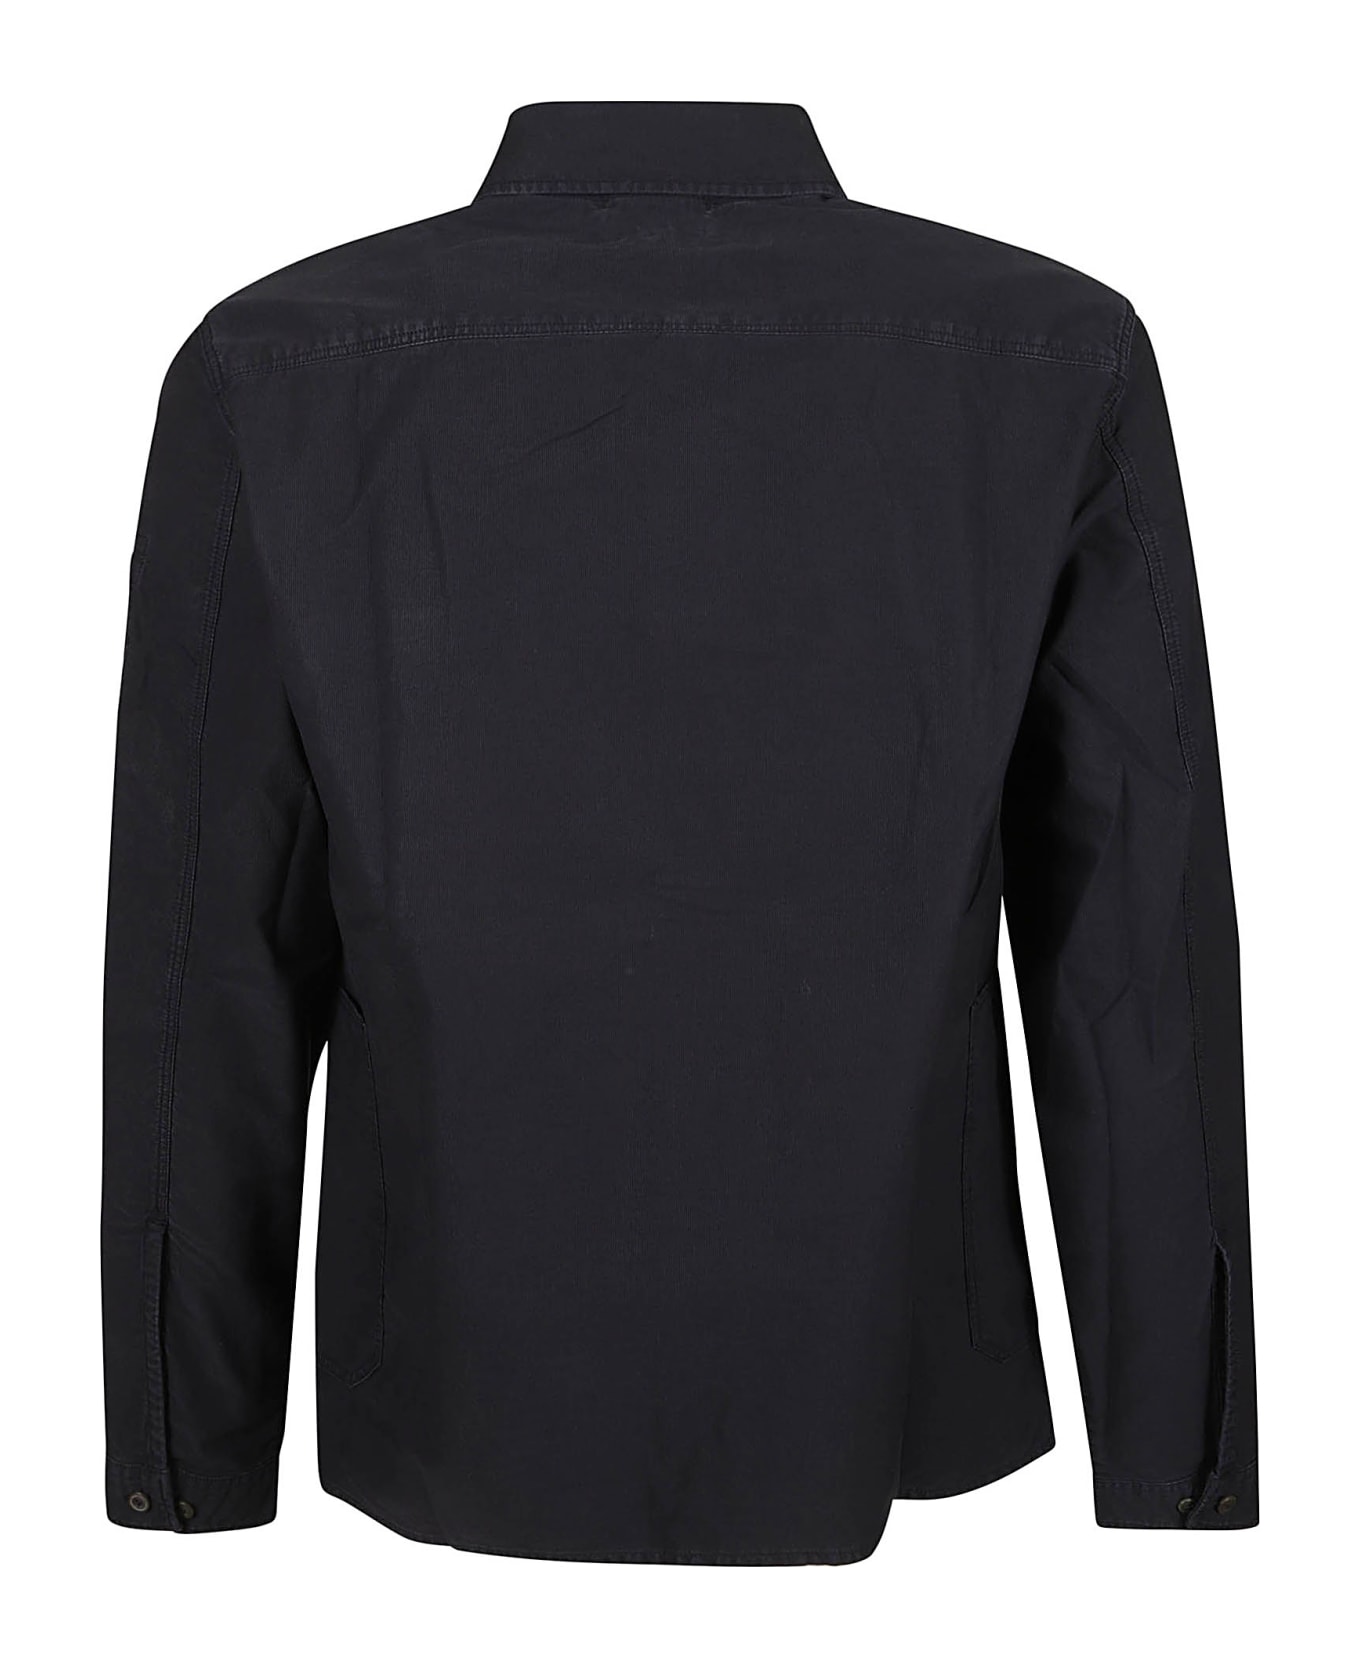 C.P. Company Ottoman Long-sleeved Shirt - TOTAL ECLIPSE